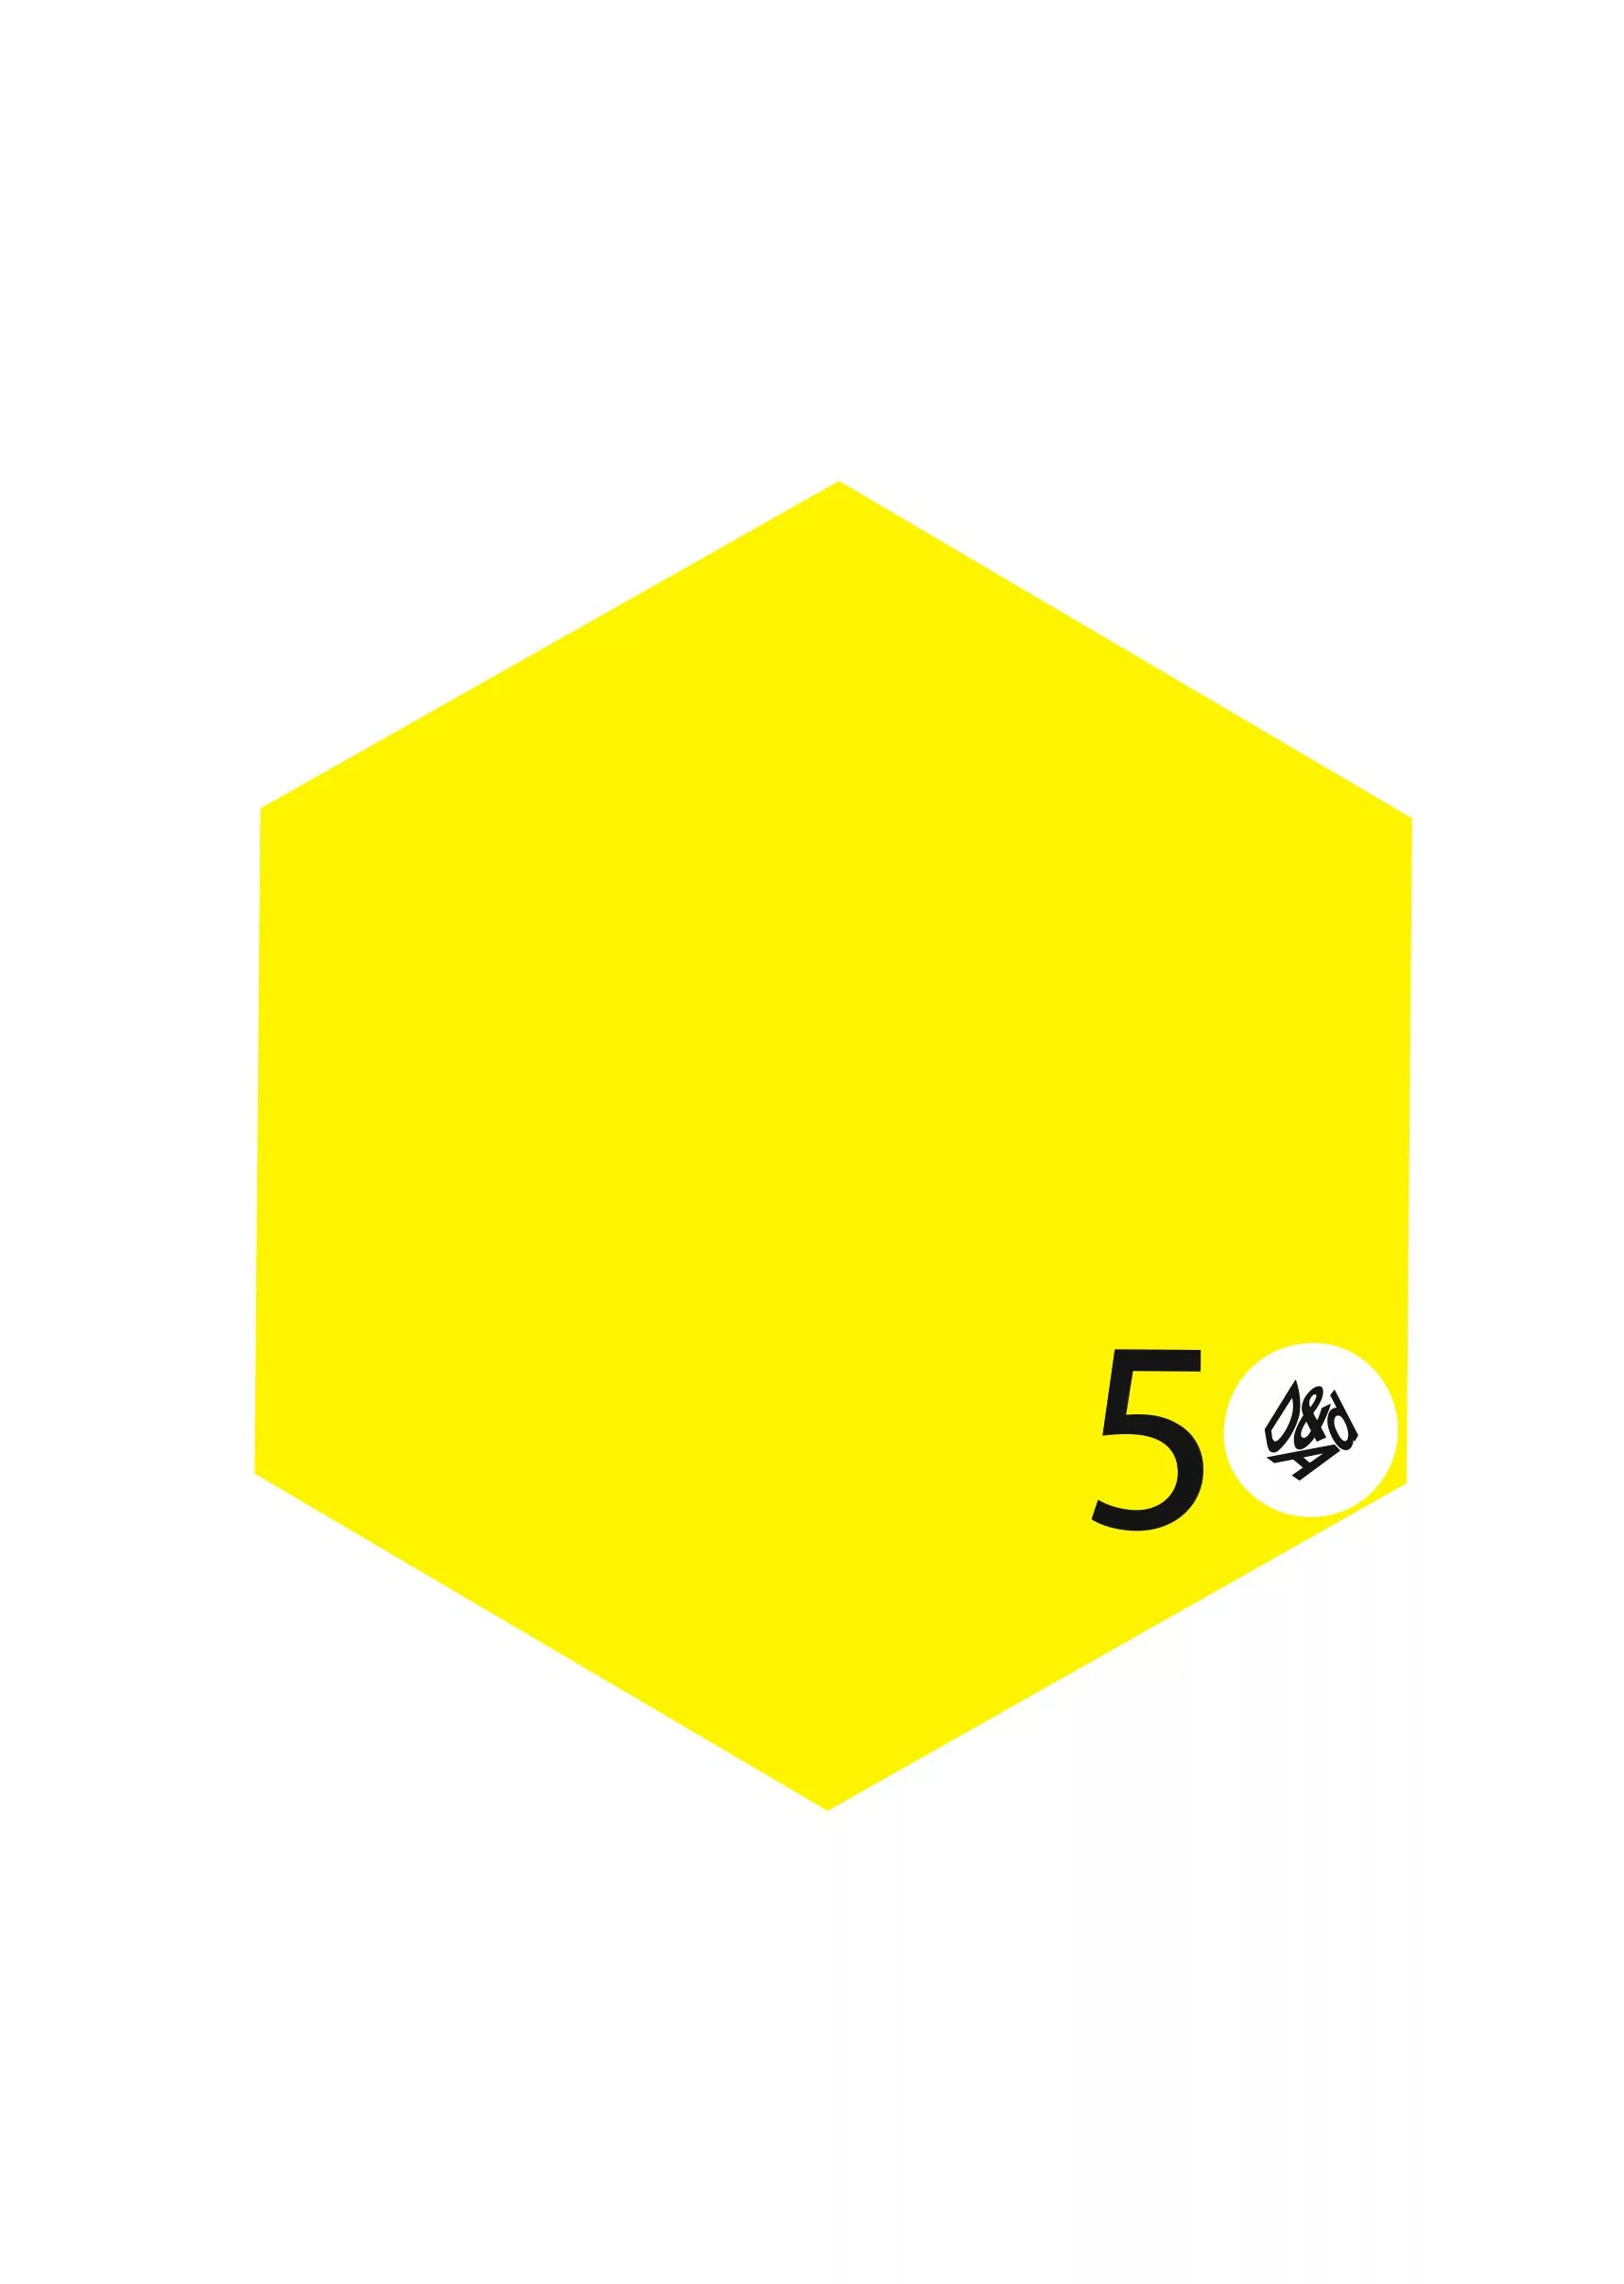 Rich result on google when search for "Design Studio, Packaging Design, Carlos Simpson Design" Yellow hexagon with number fifty and the D&AD Logo